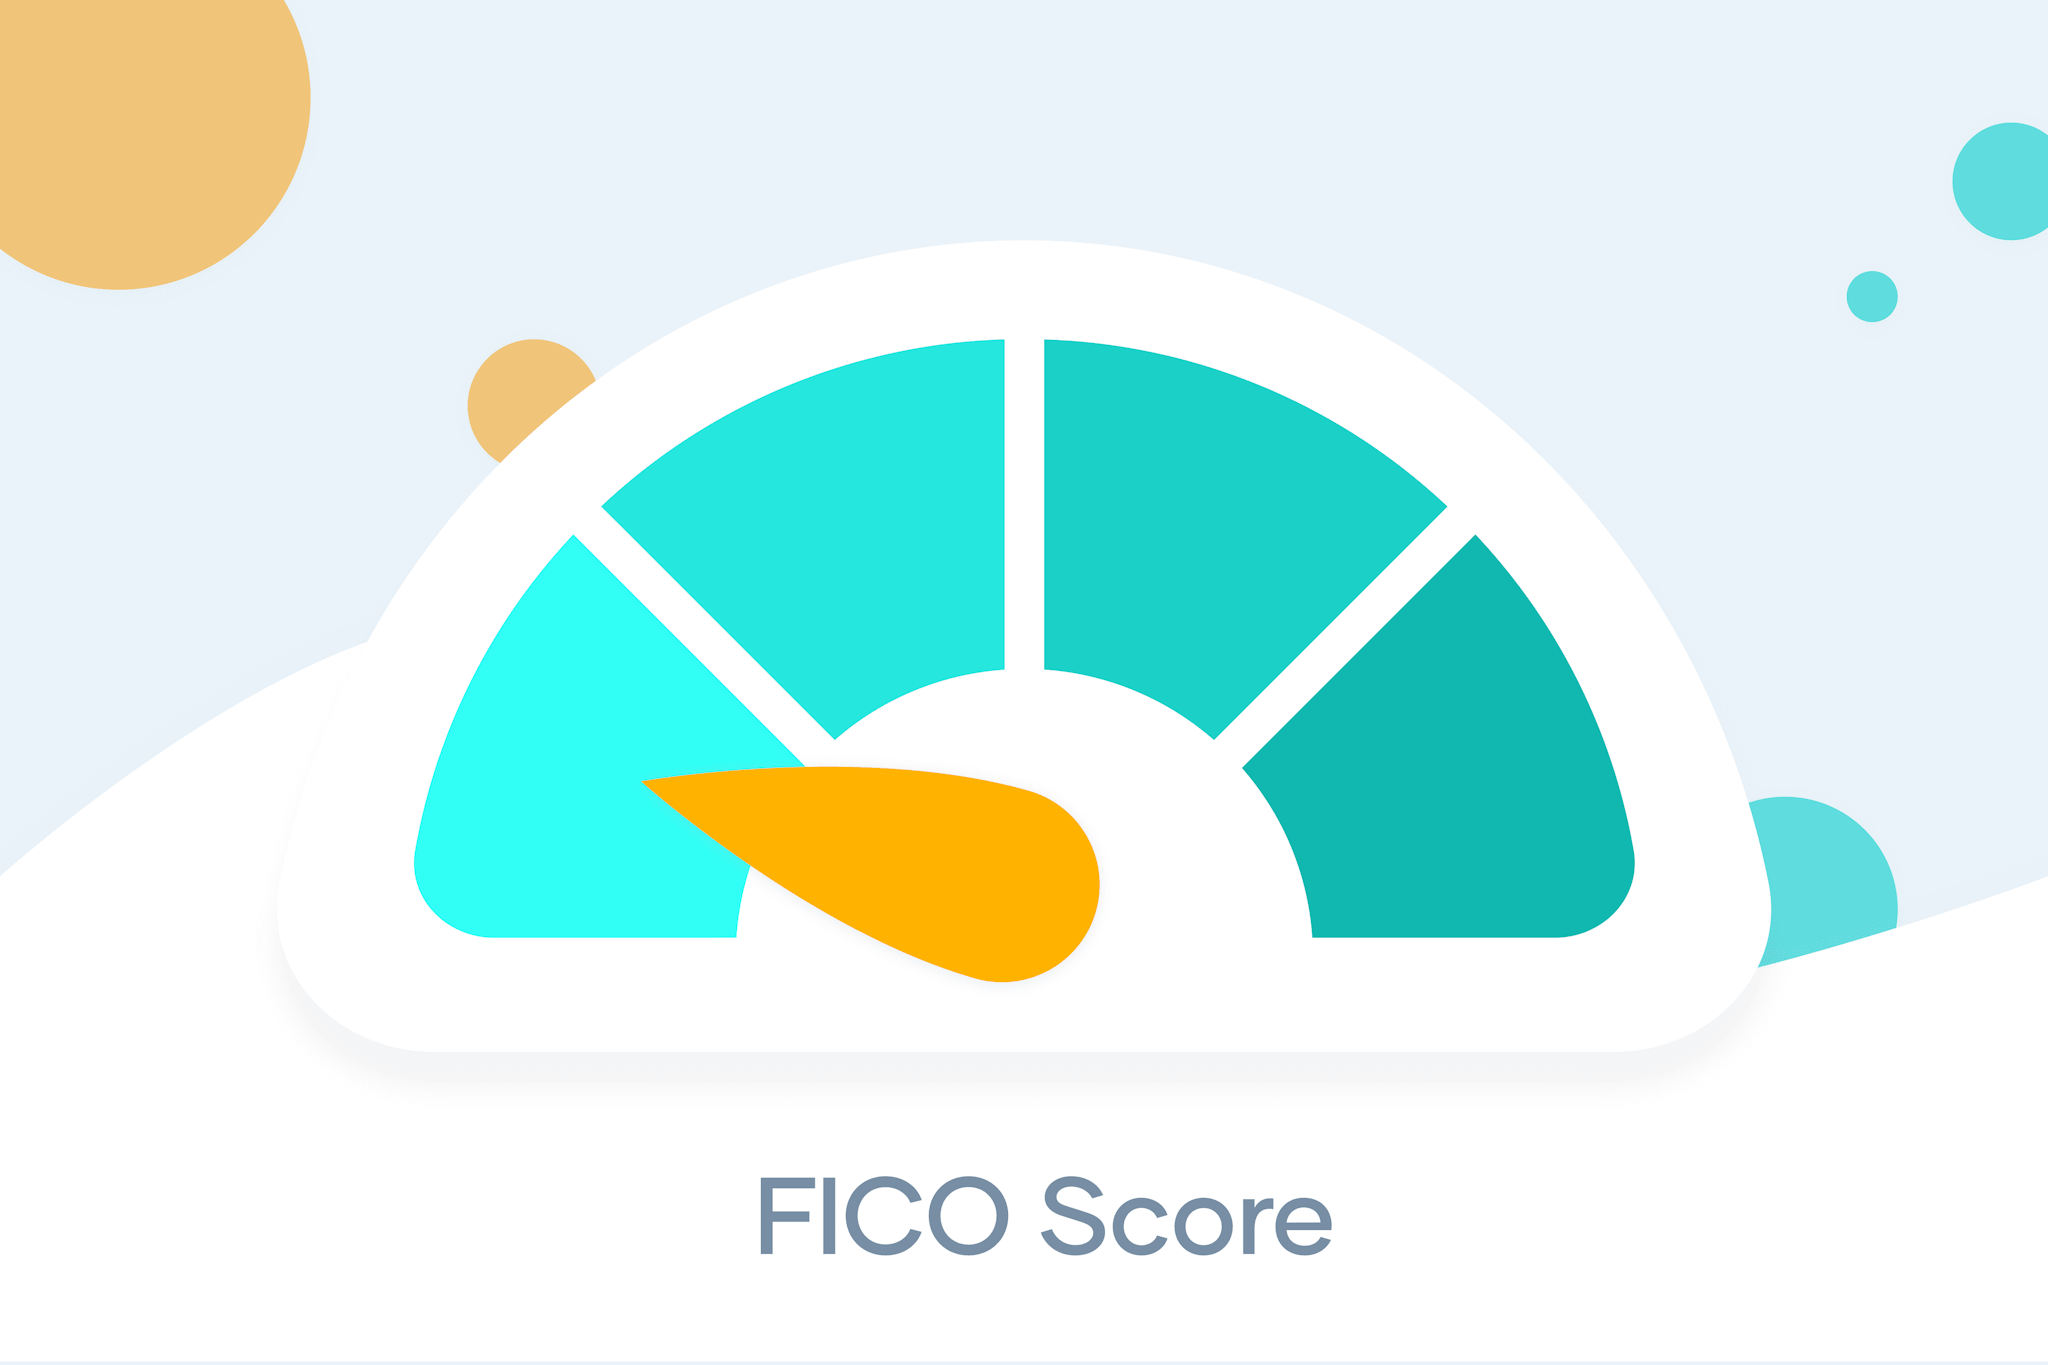 FICO Credit Score in Canada: What Is It and Why Does It Matter